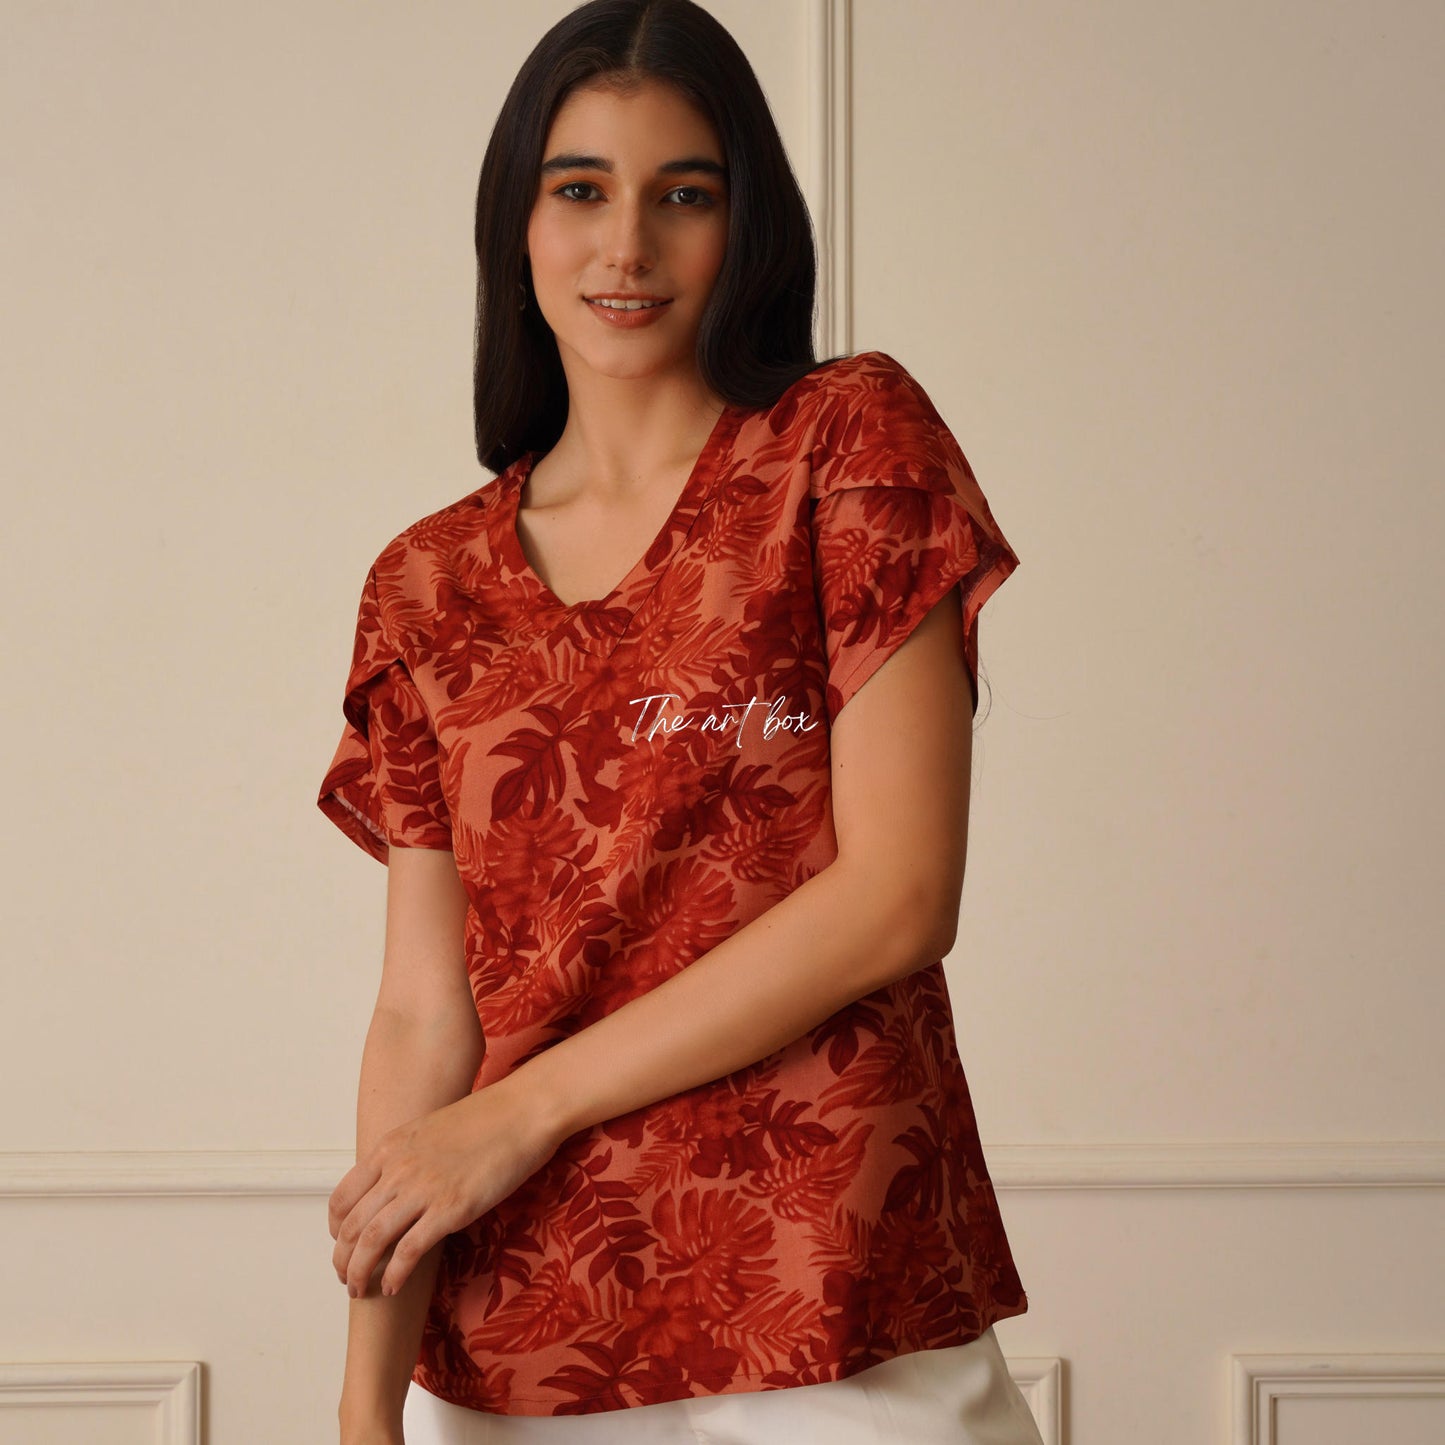 Women's Short Sleeve Shirts Floral V Neck Summer Tunic Tops Comfy Tees Blouse Loose Fit for Leggings